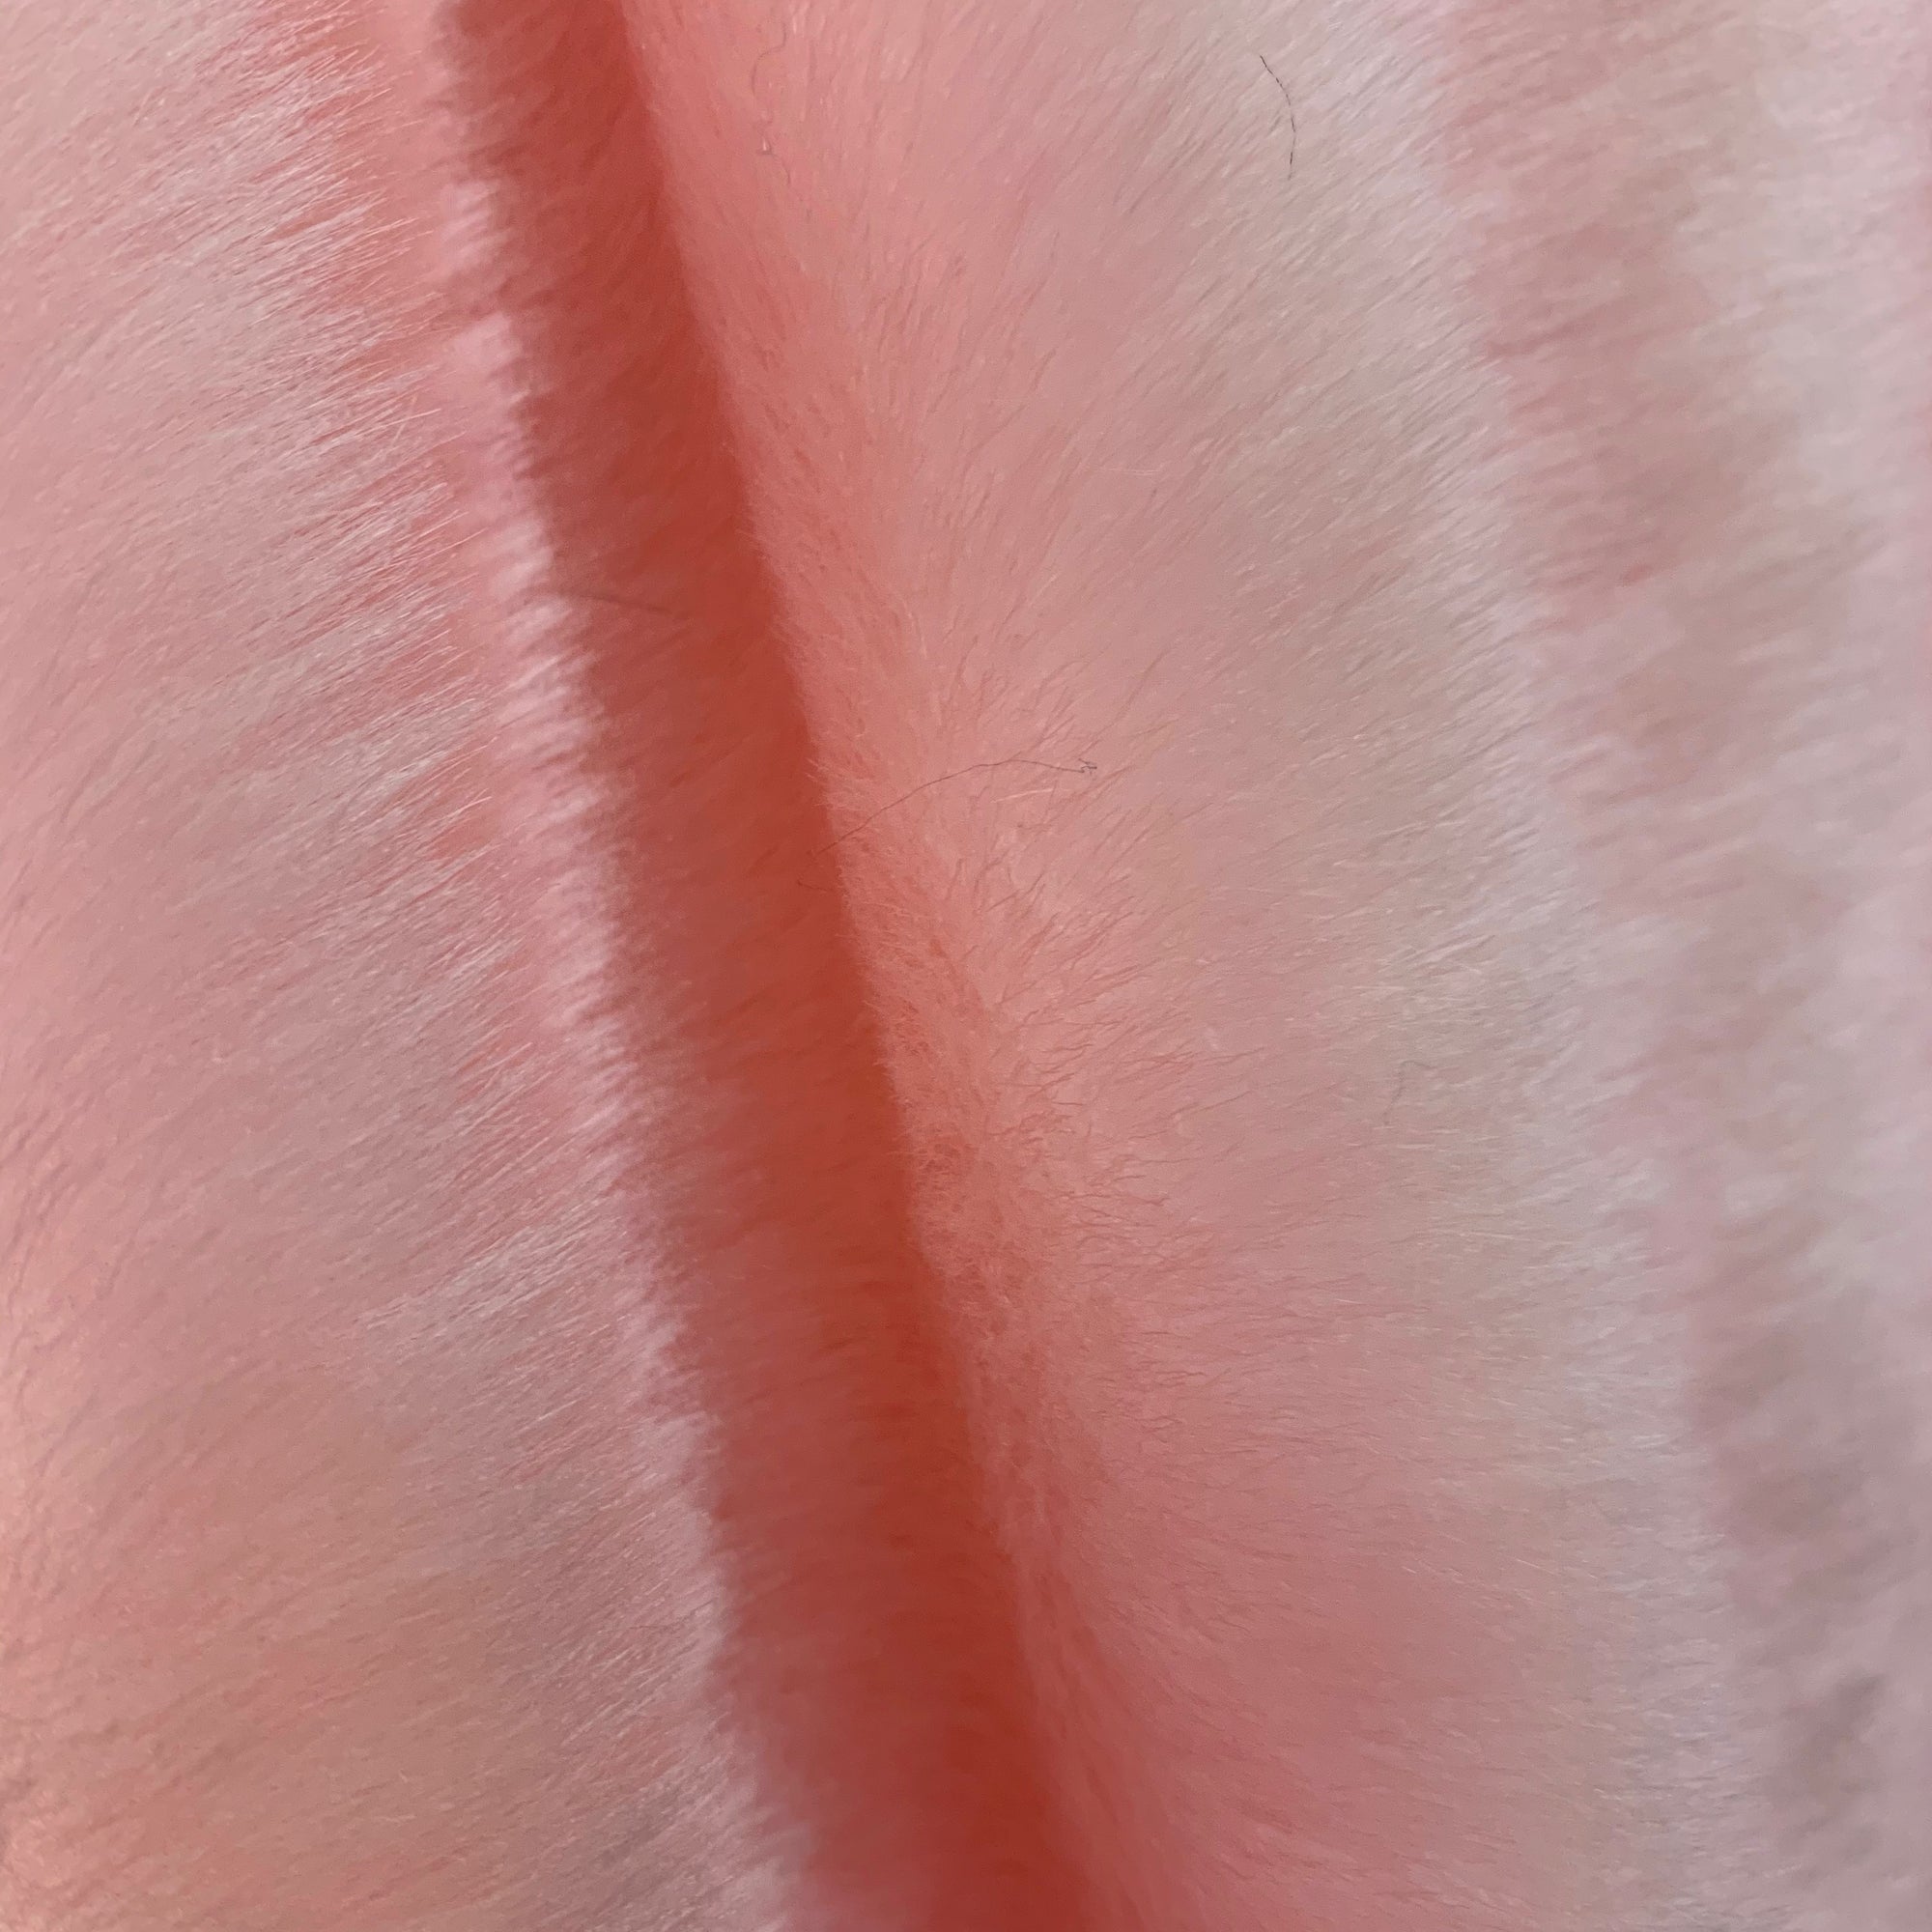 Zahra LIGHT PINK 0.75 Inch Short Pile Soft Faux Fur Fabric for Fursuit, Cosplay Costume, Photo Prop, Trim, Throw Pillow, Crafts